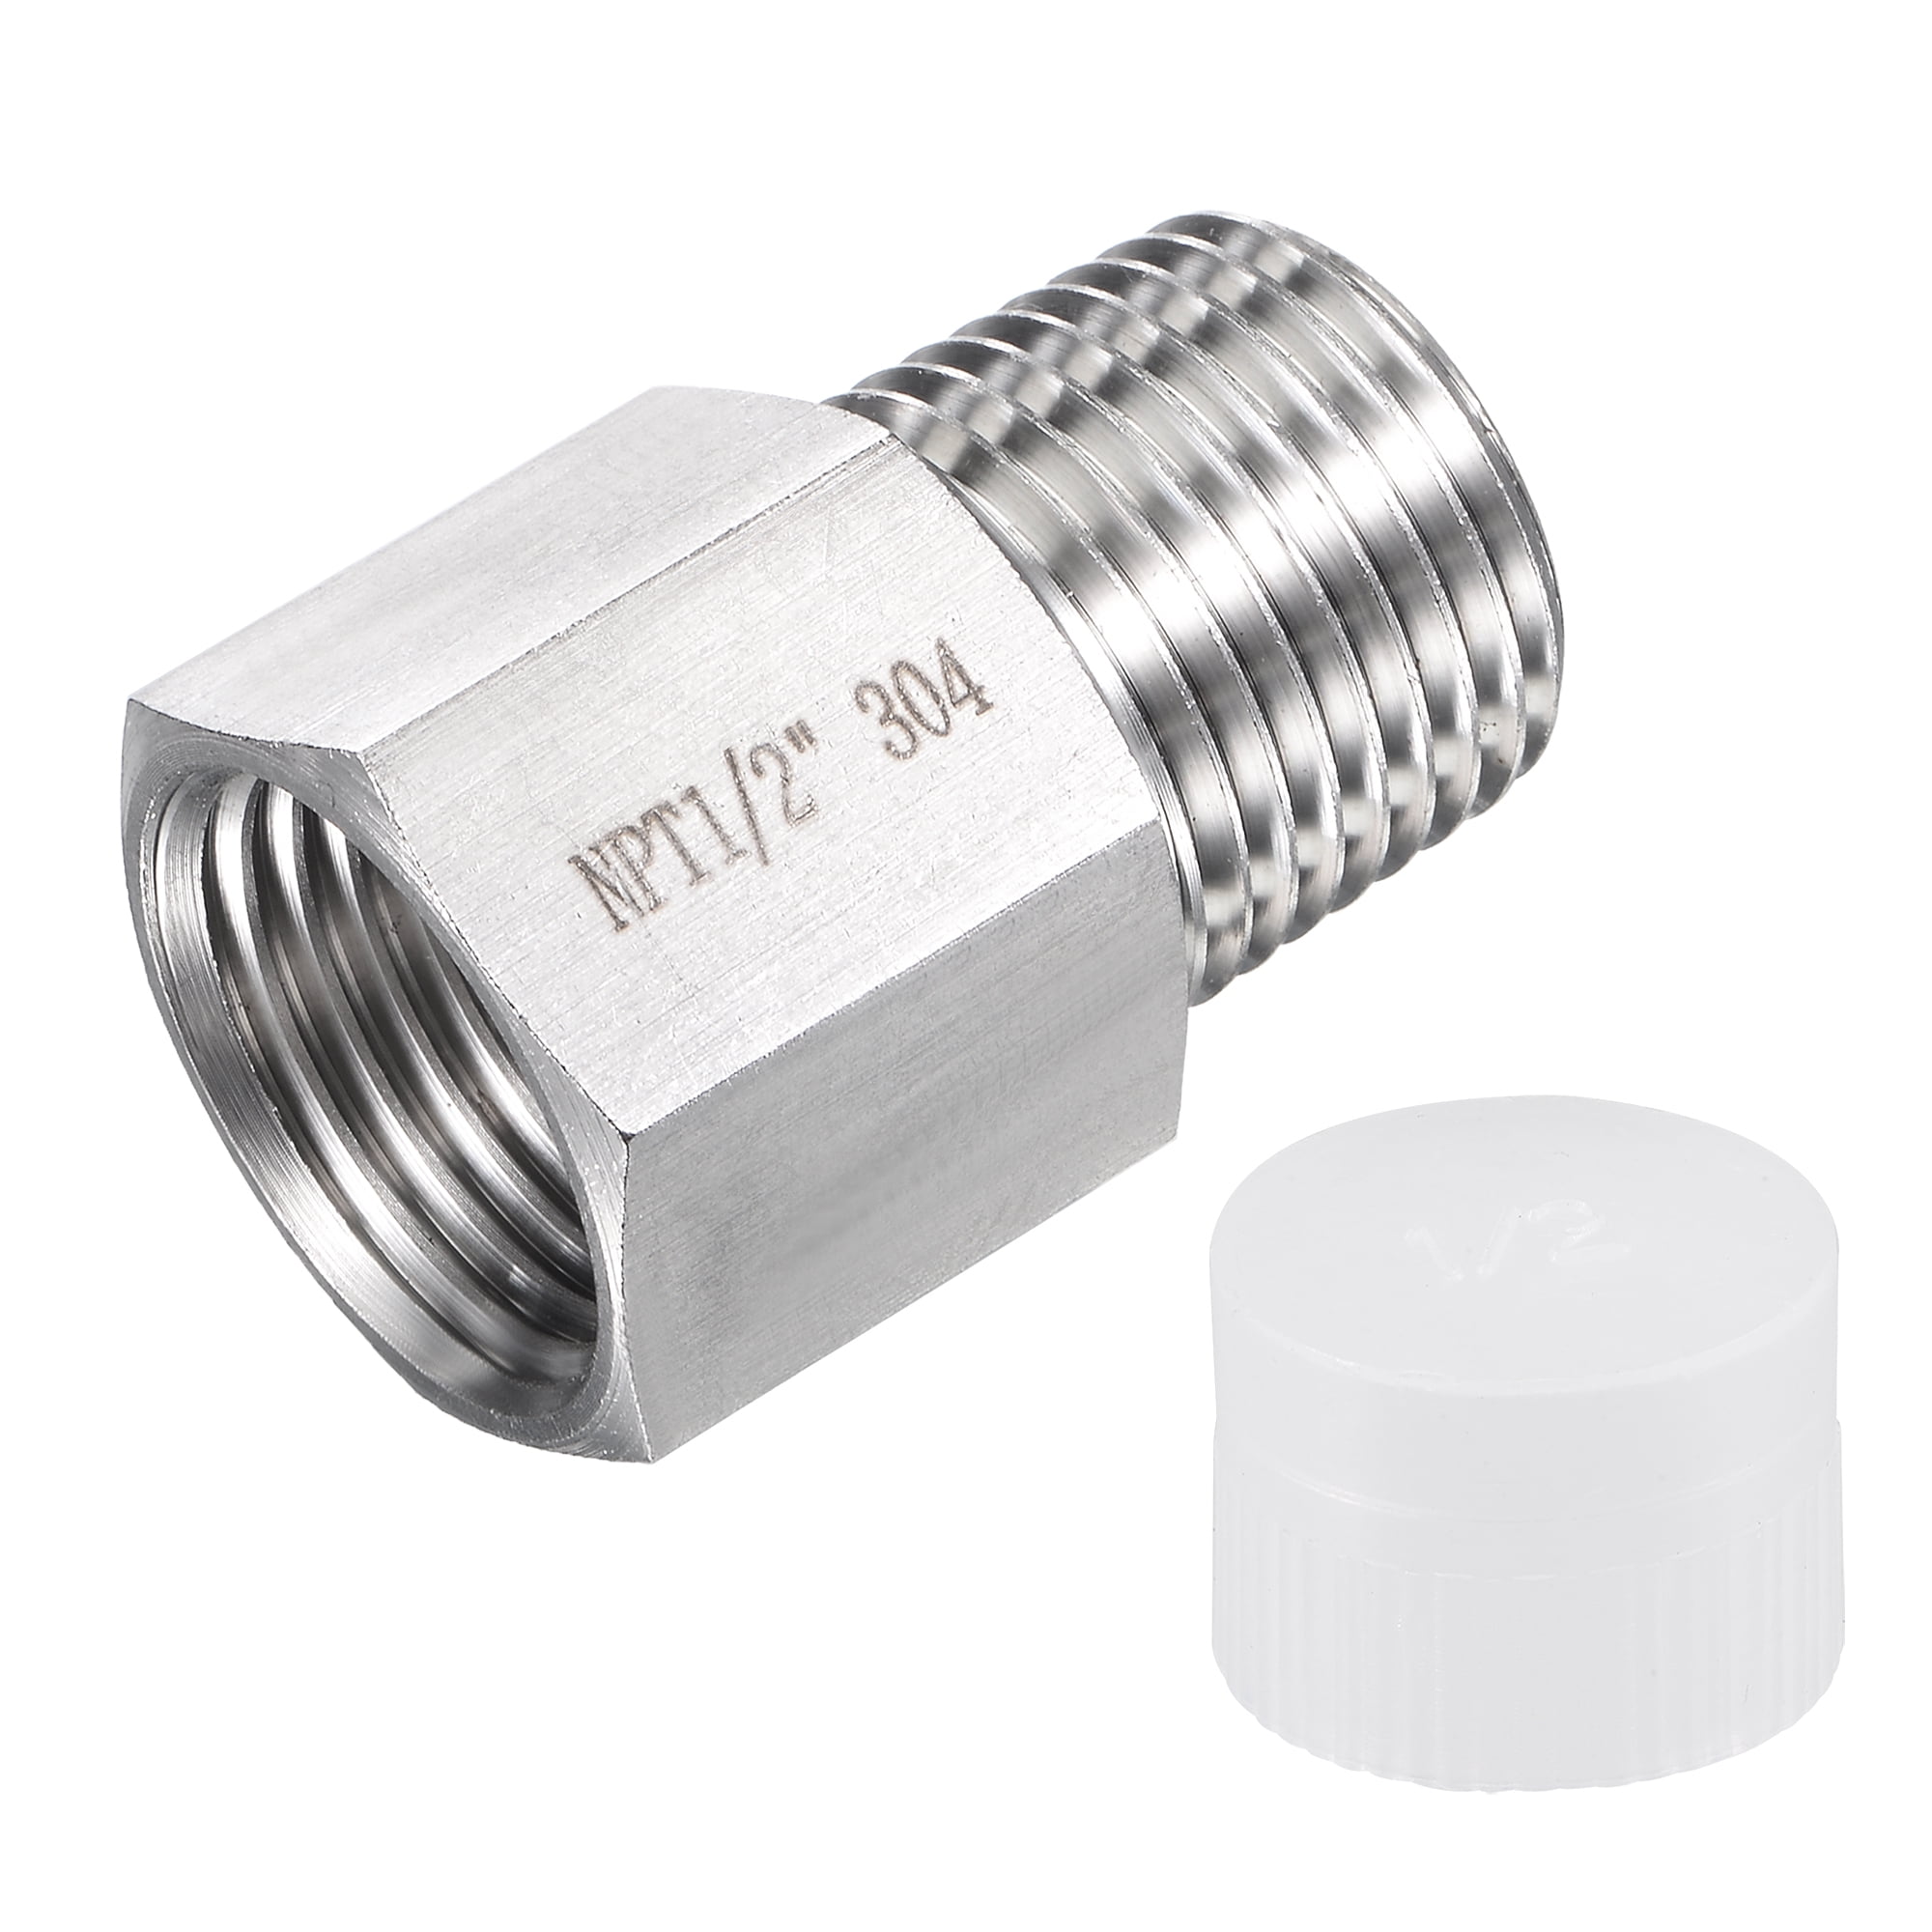 BSP Male x Female Stainless Steel Pipe Fittings Reducing Bush Adapter Connector 